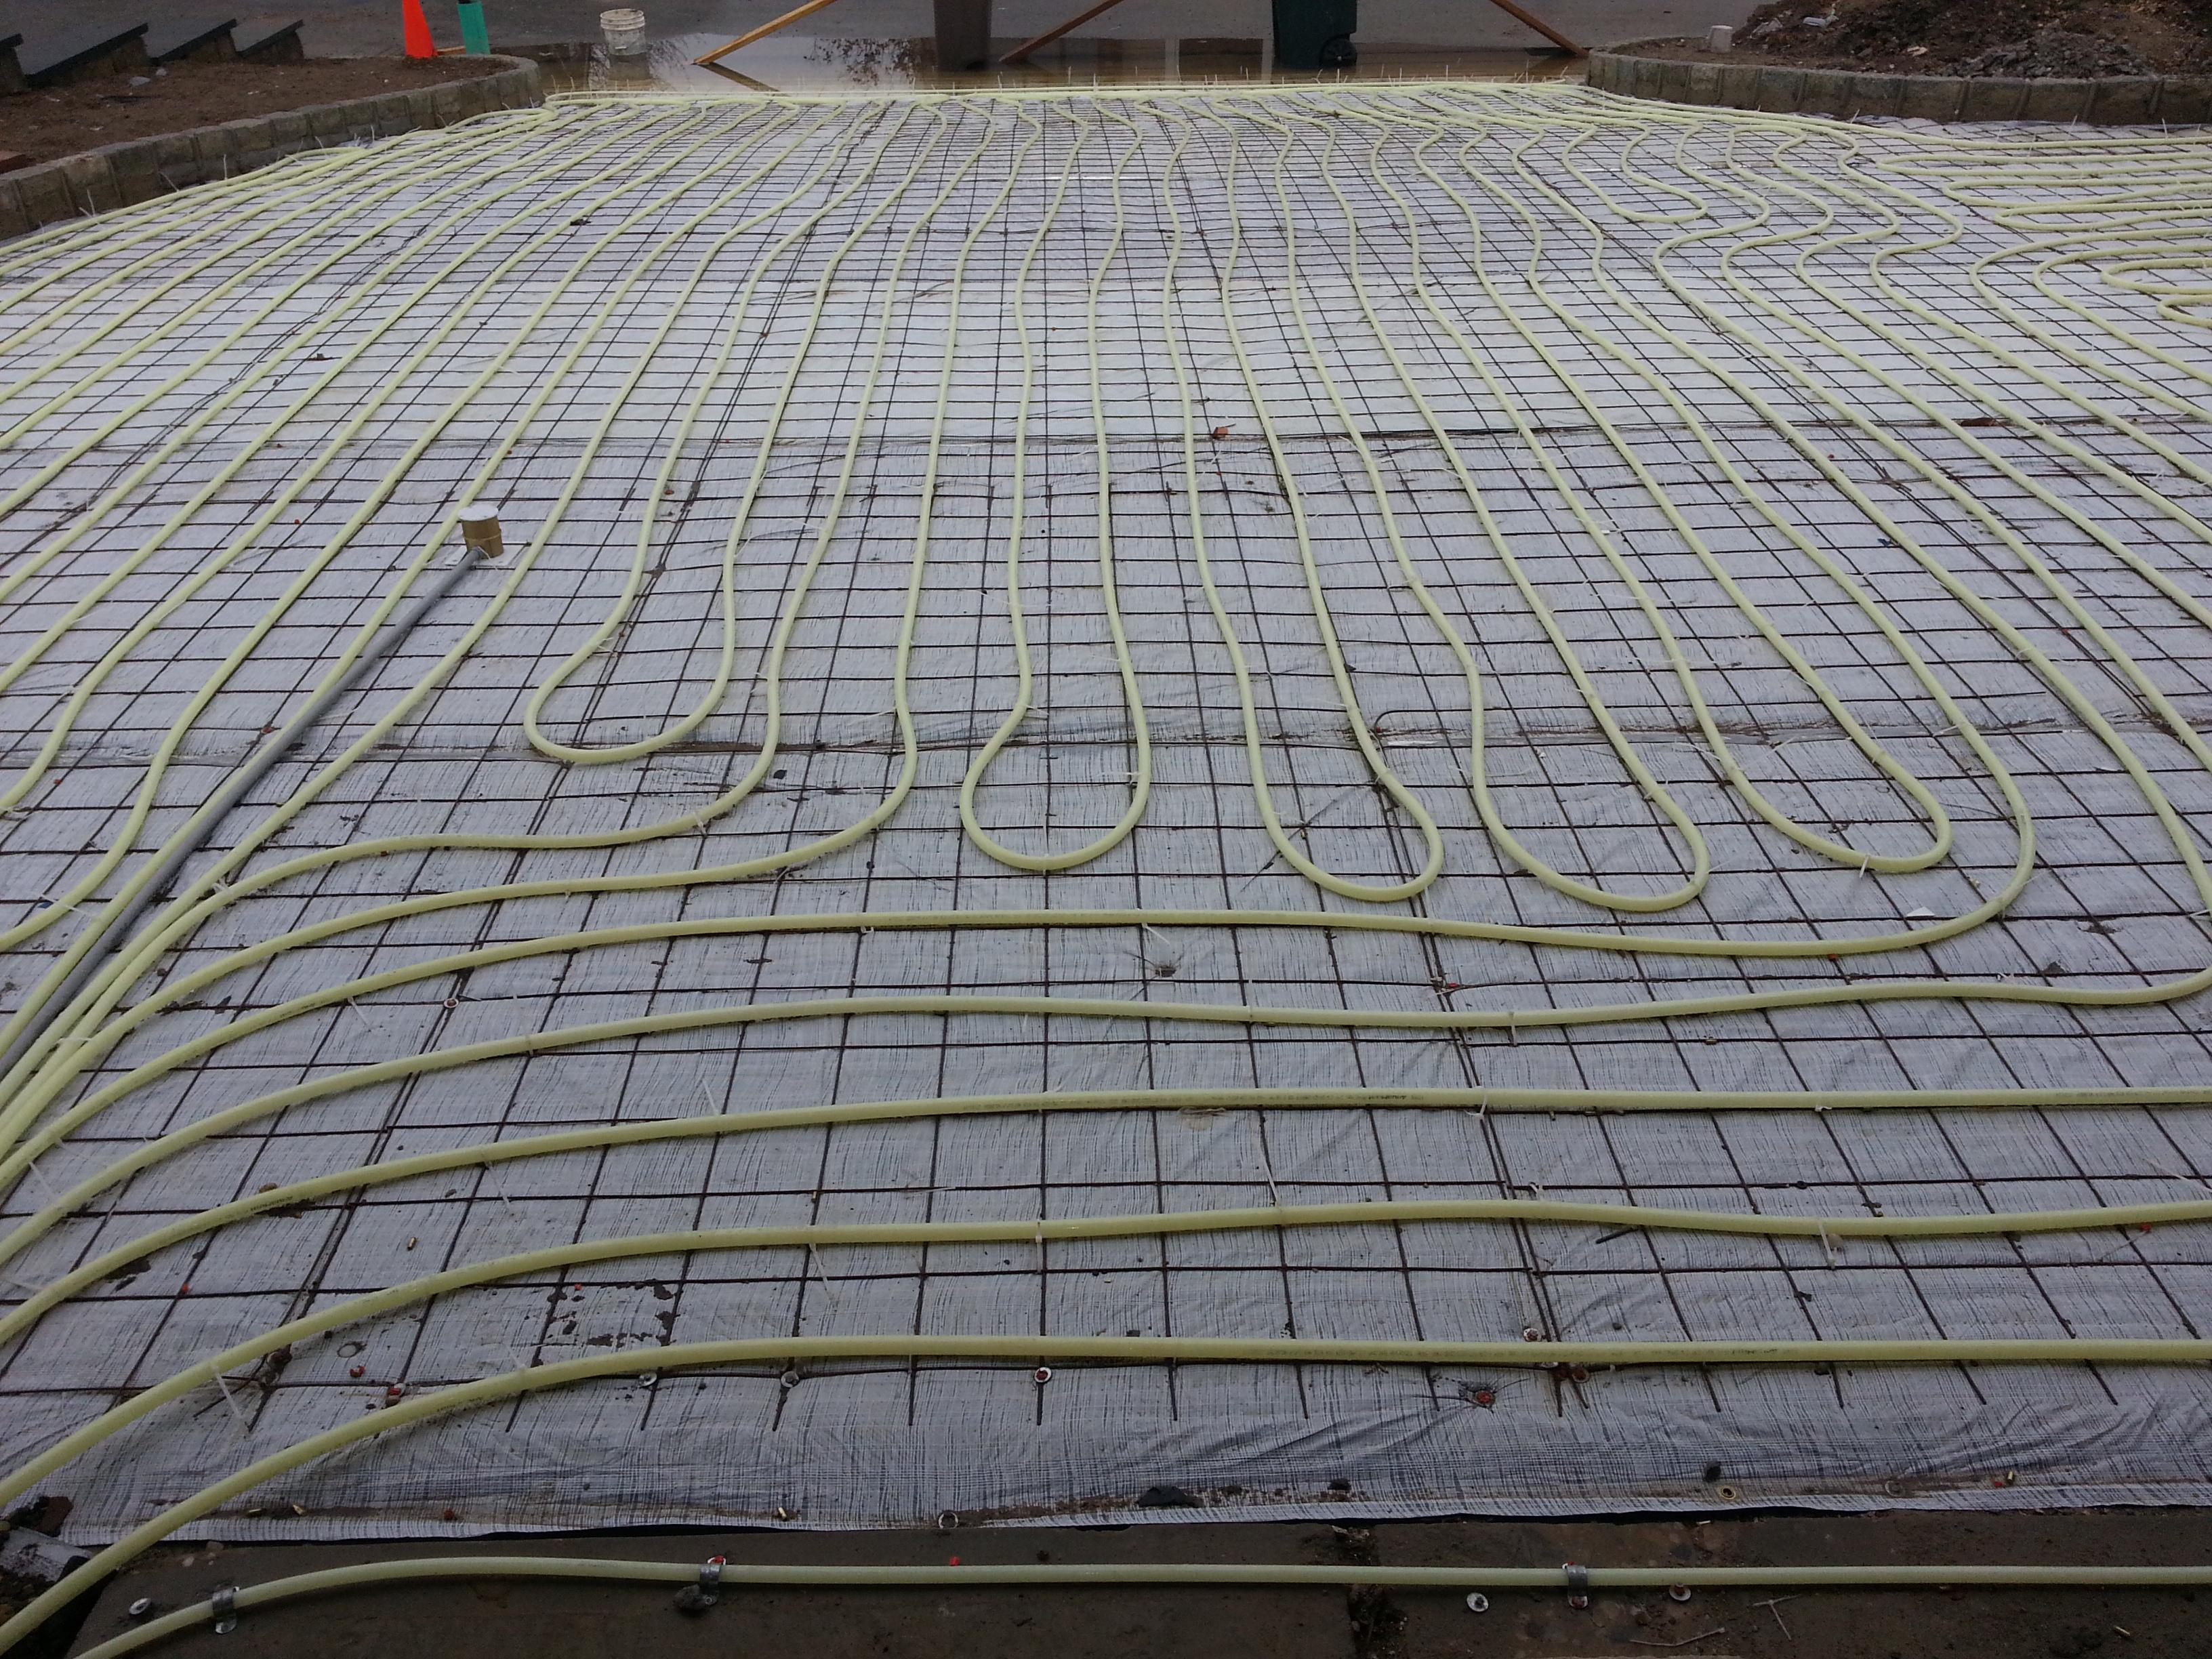 Here is how the tubing is laid before the driveway is poured.